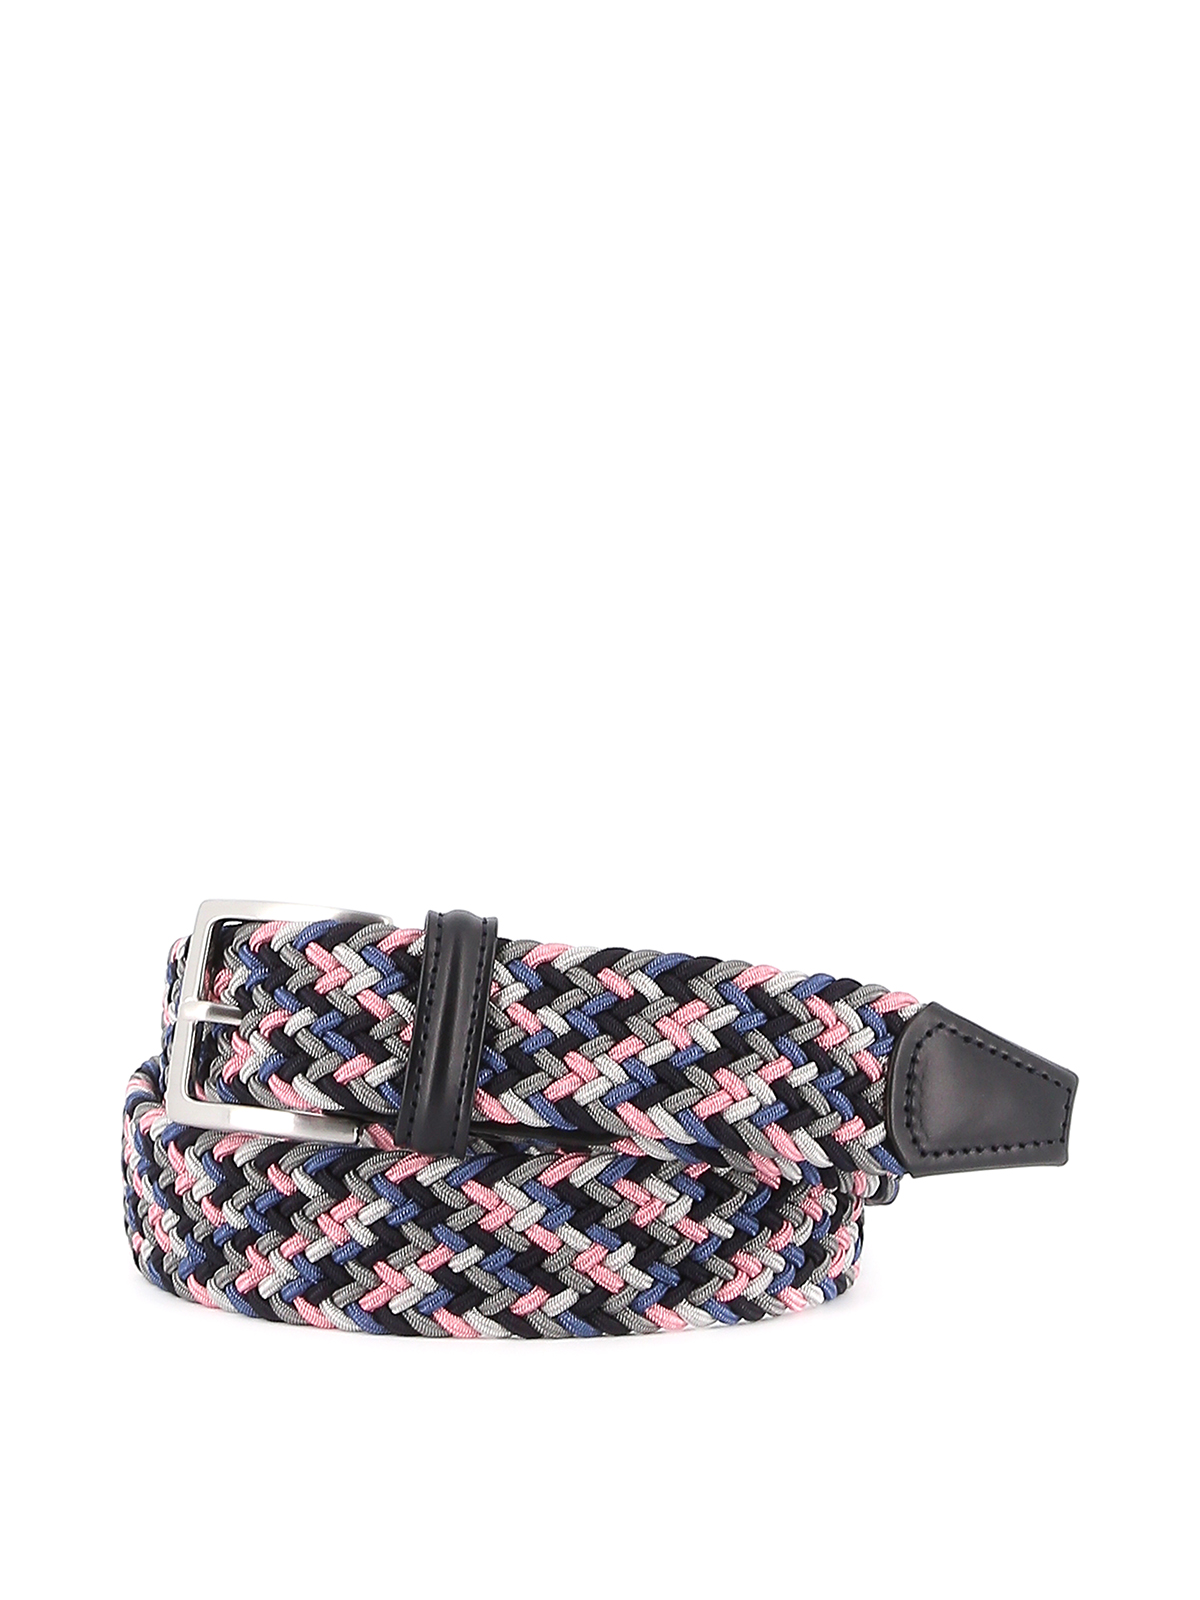 ANDERSON'S PINK AND BLUE STRETCH WOVEN BELT